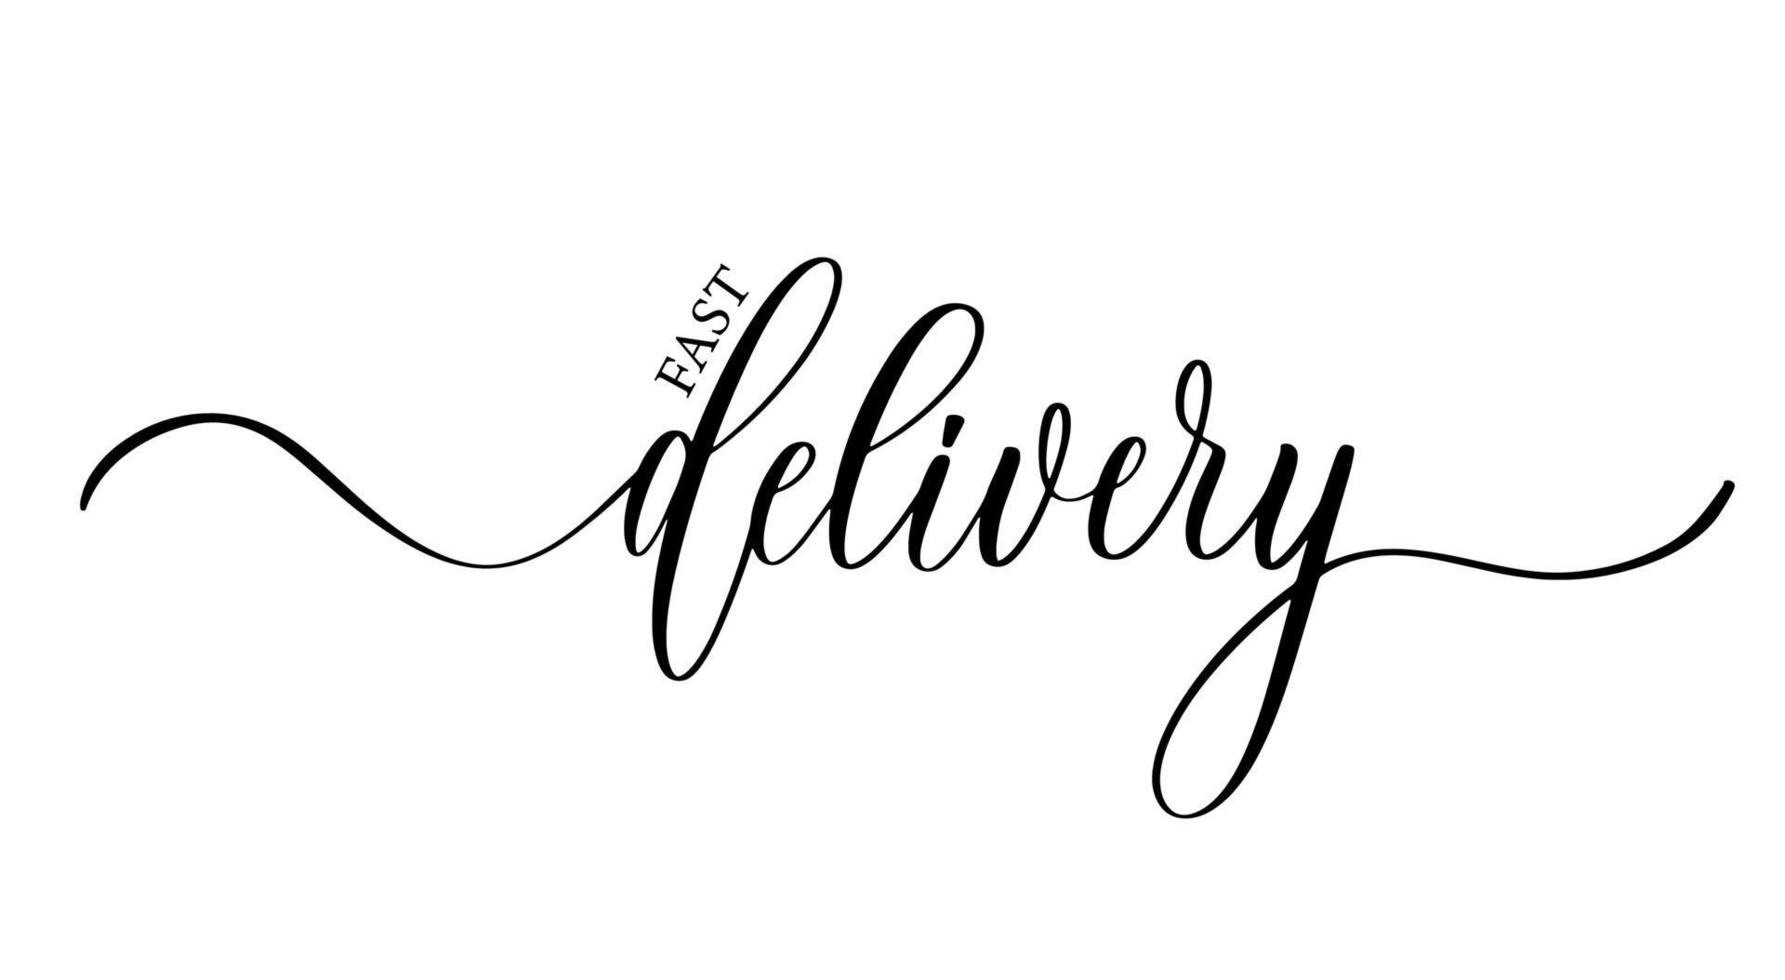 Fast delivery calligraphy typographic inscription. vector